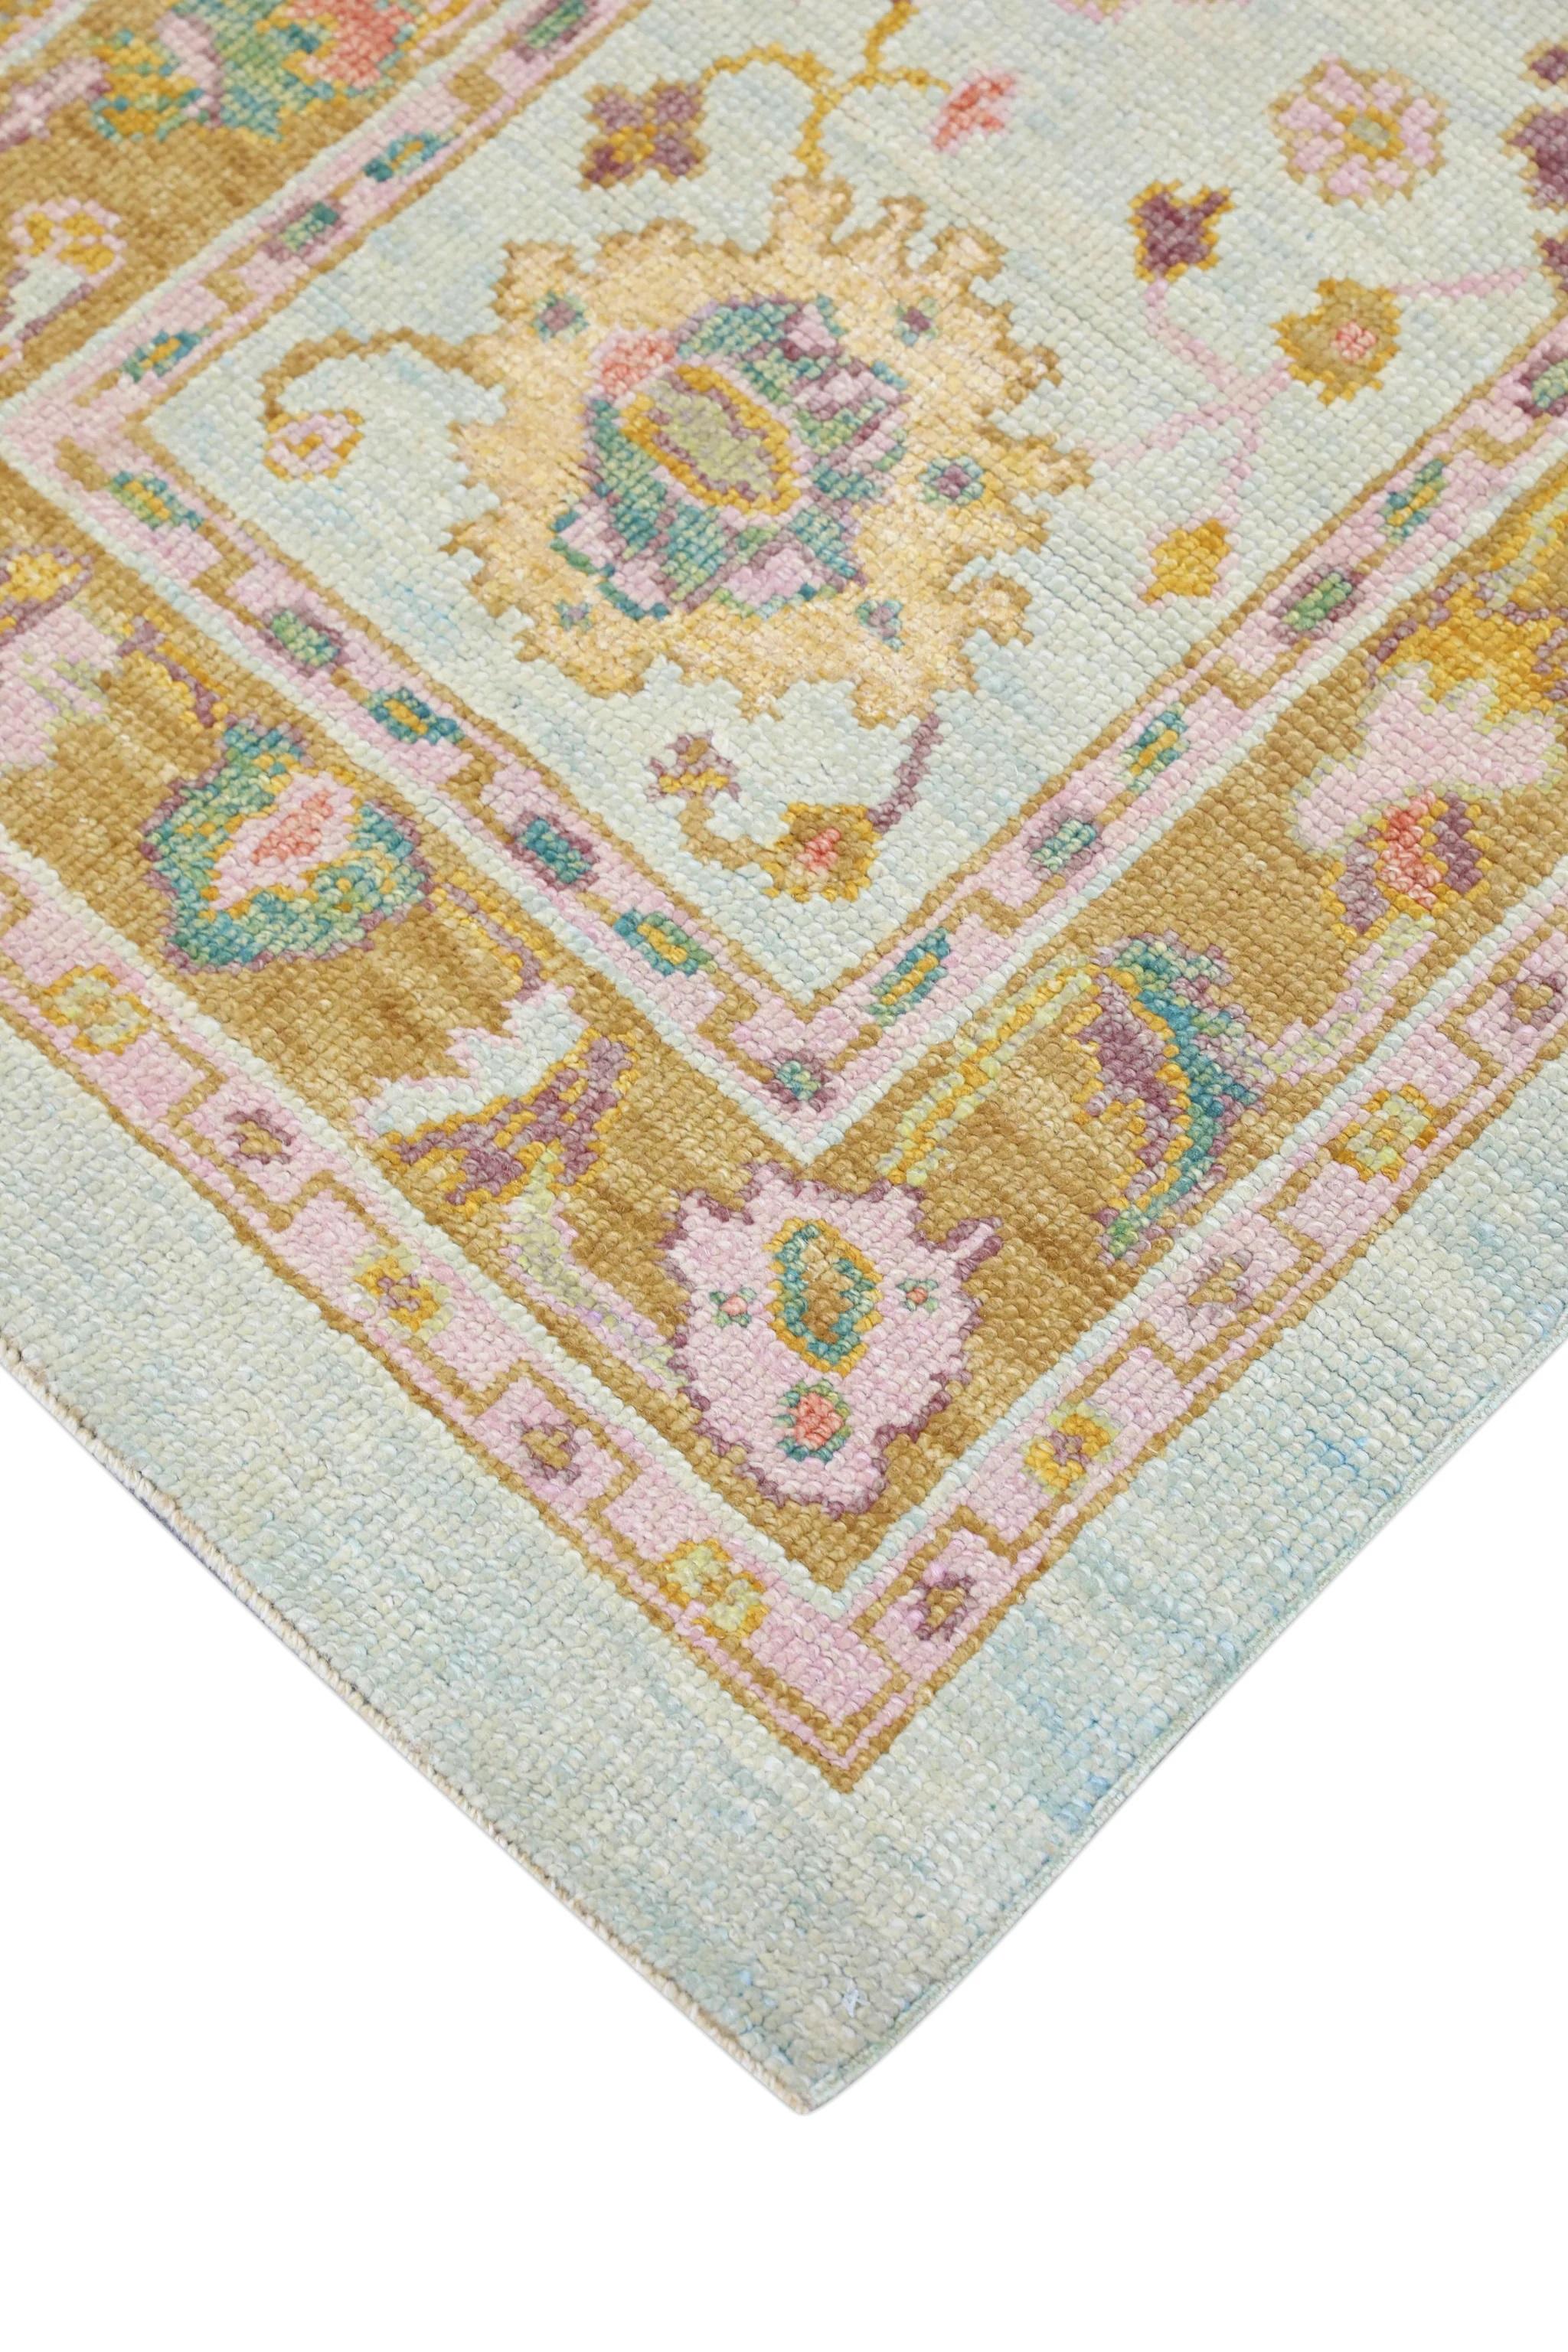 Wool Handwoven Turkish Oushak Rug with Colorful Floral Design 2'10